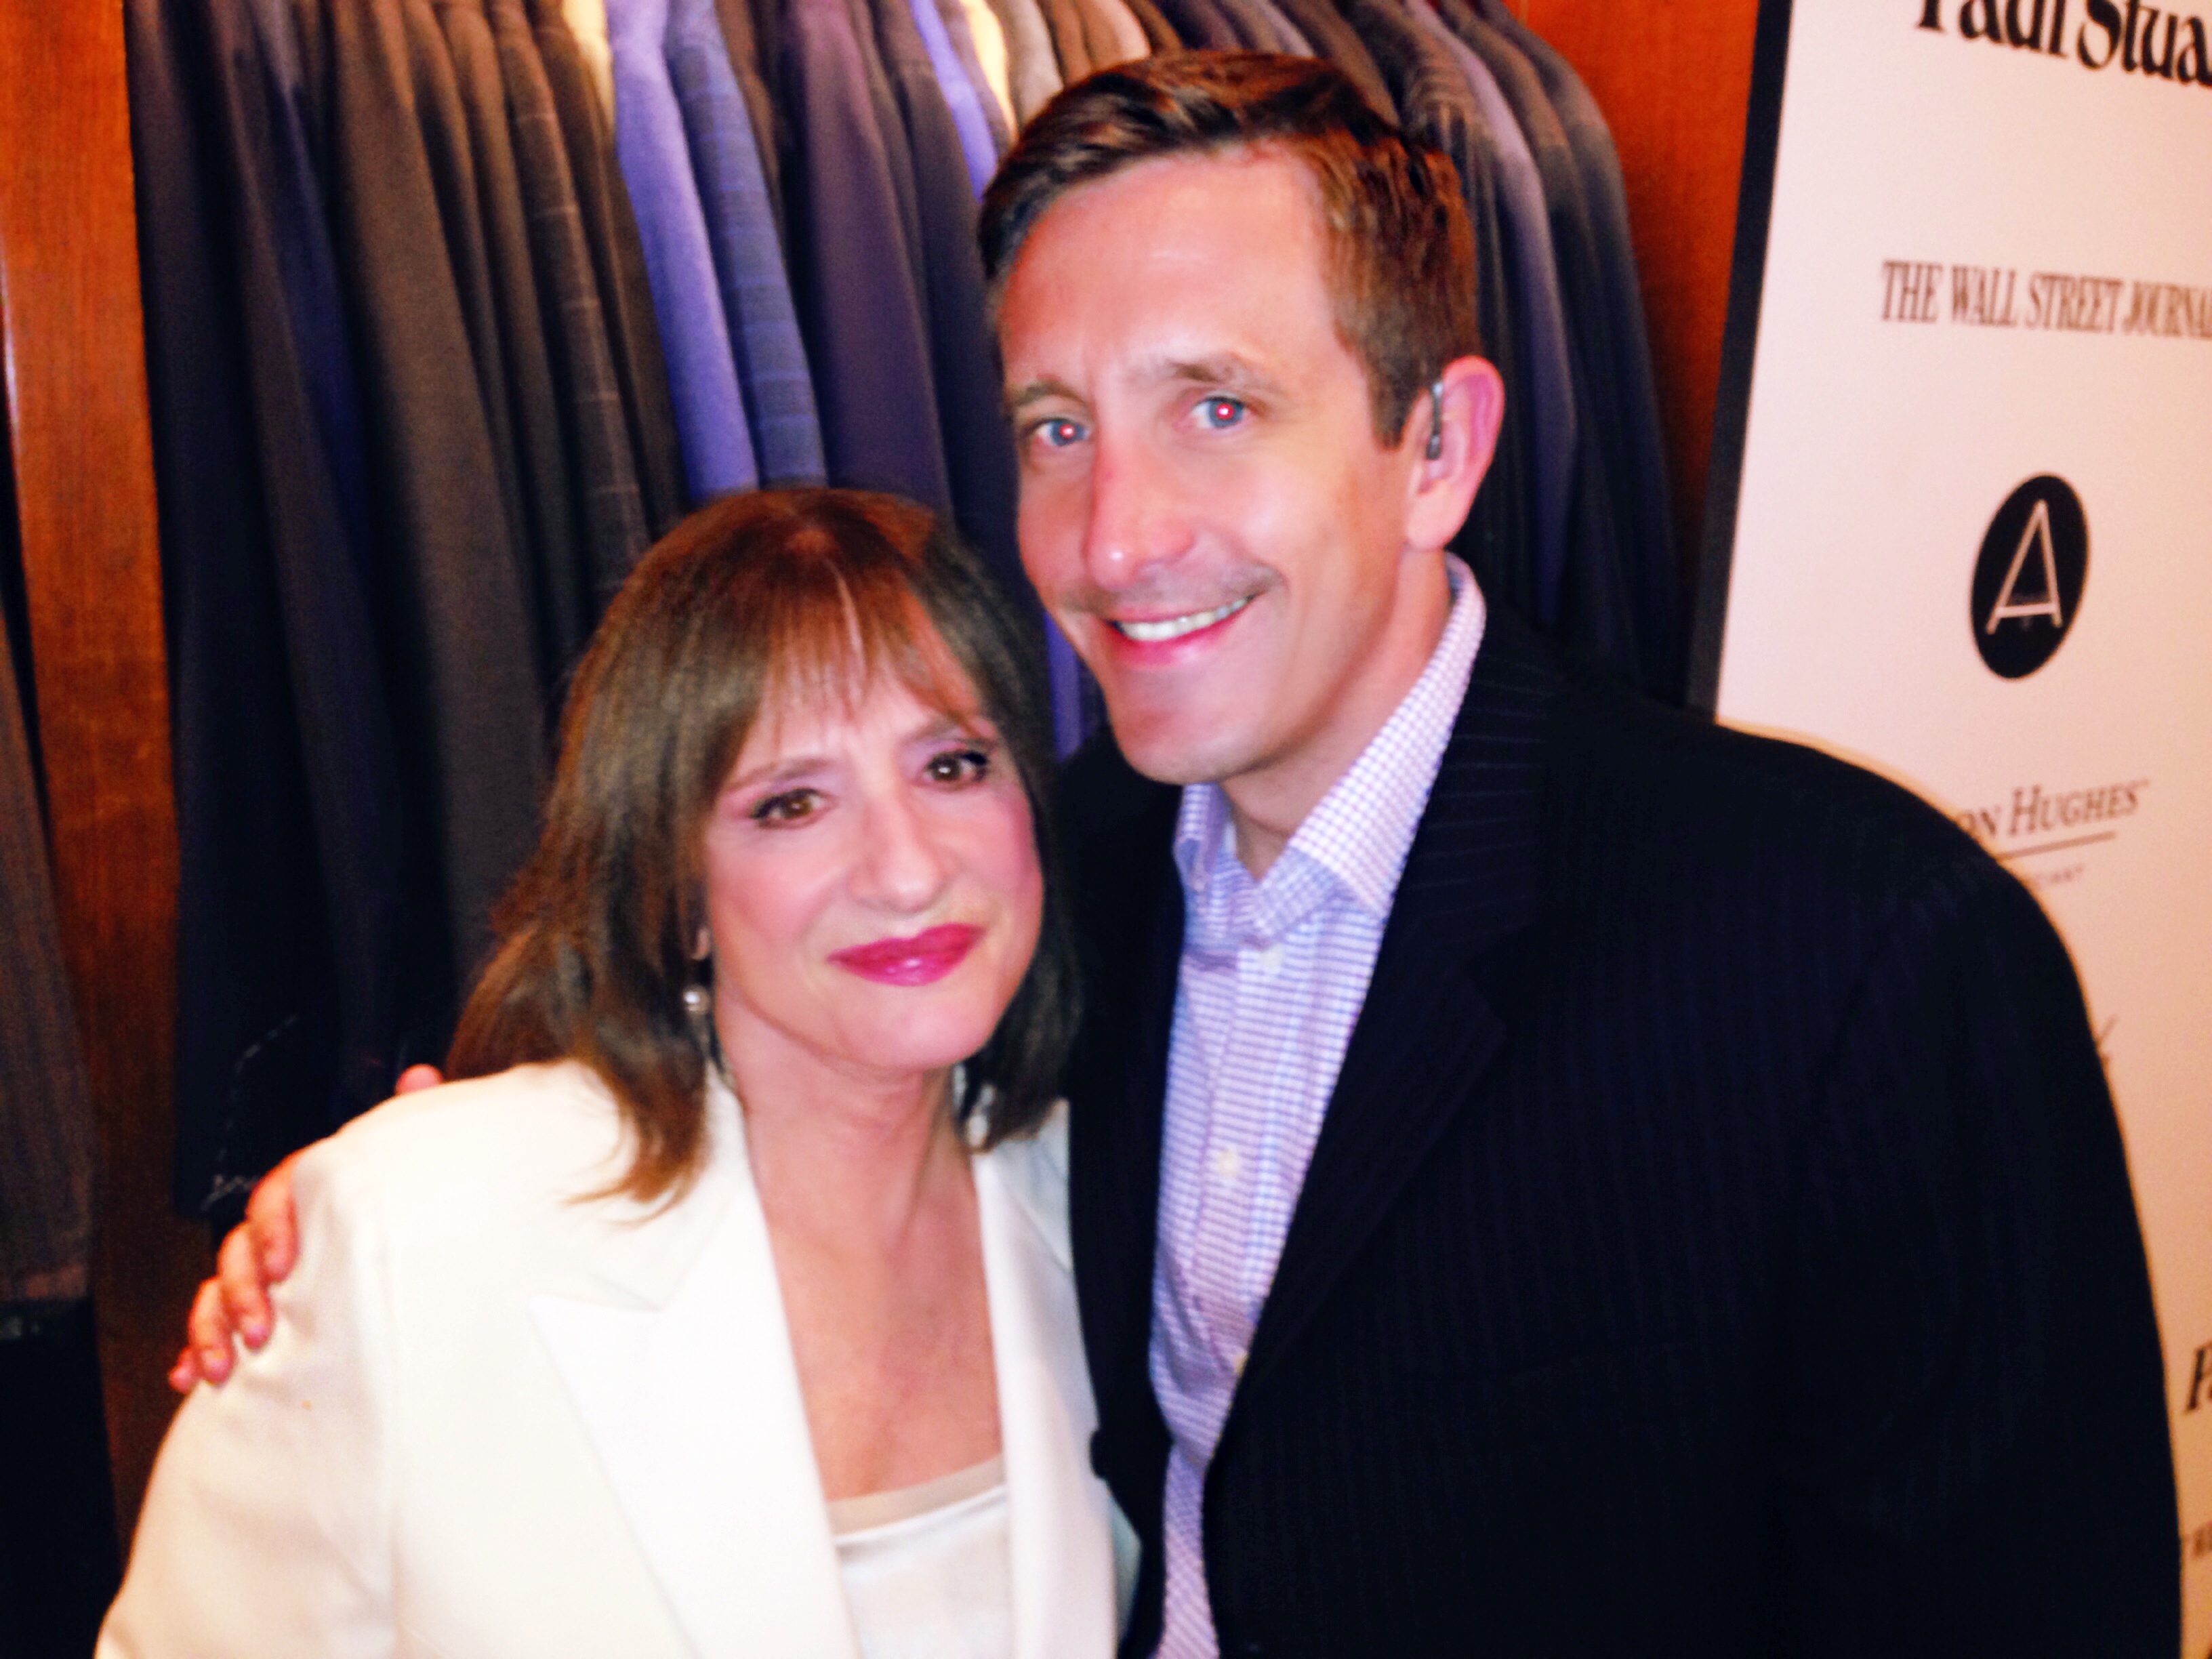 Patti pictures lupone of 'Print that!'